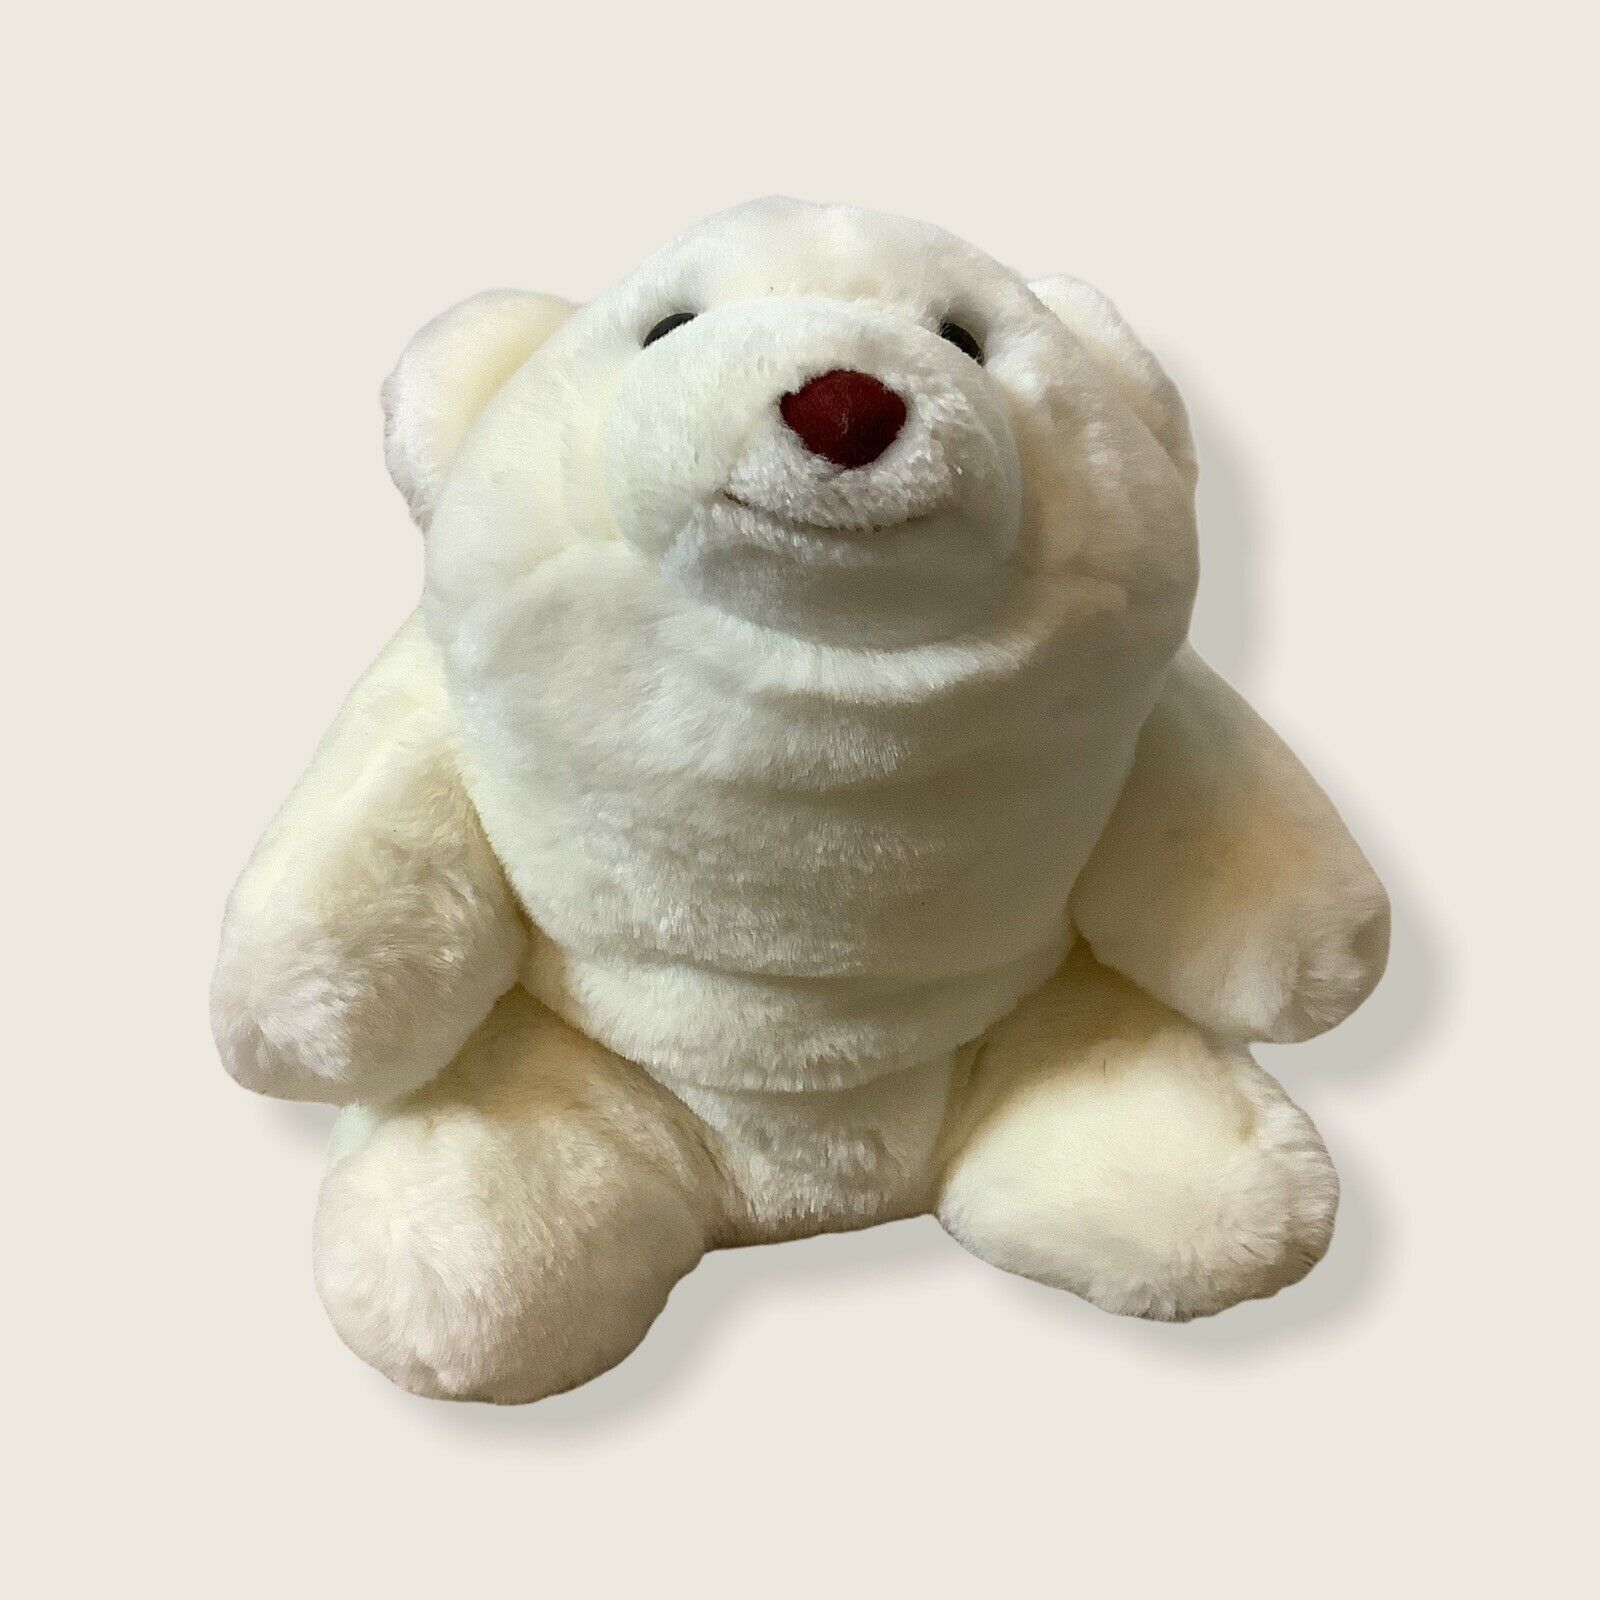 Vintage White Well Made Teddy Bear 12 Stuffed Plush Toy 